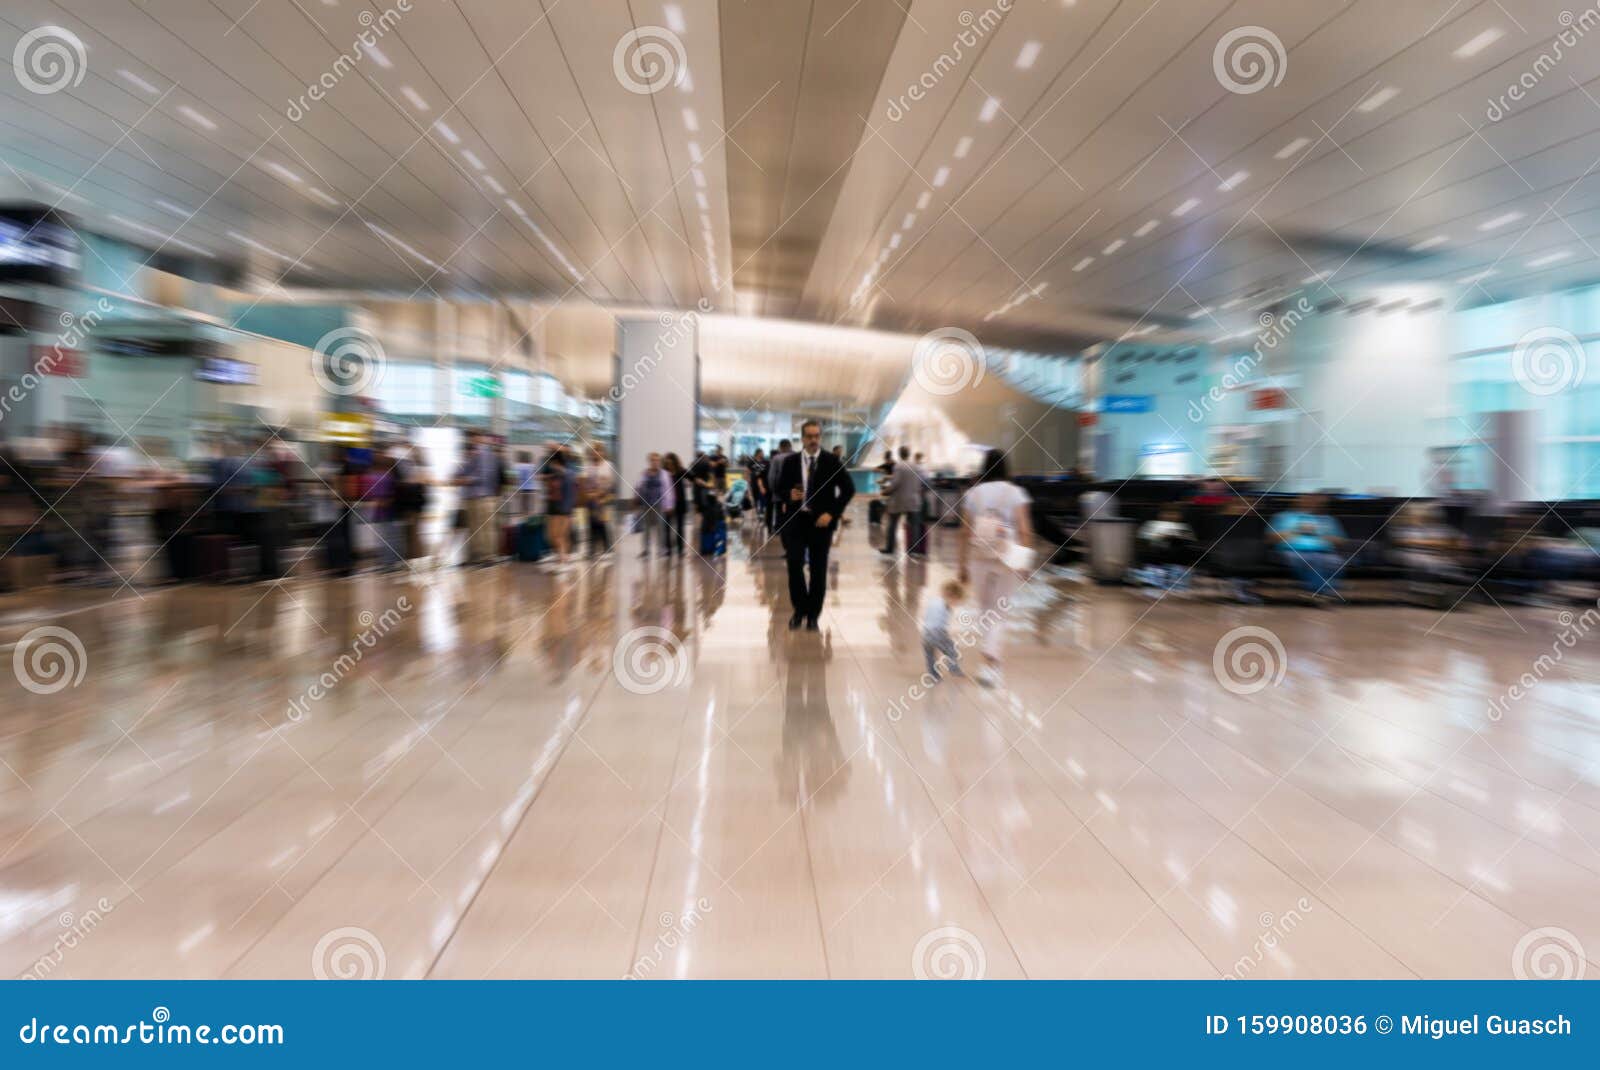 airport interior with motion blur, motion effect - image